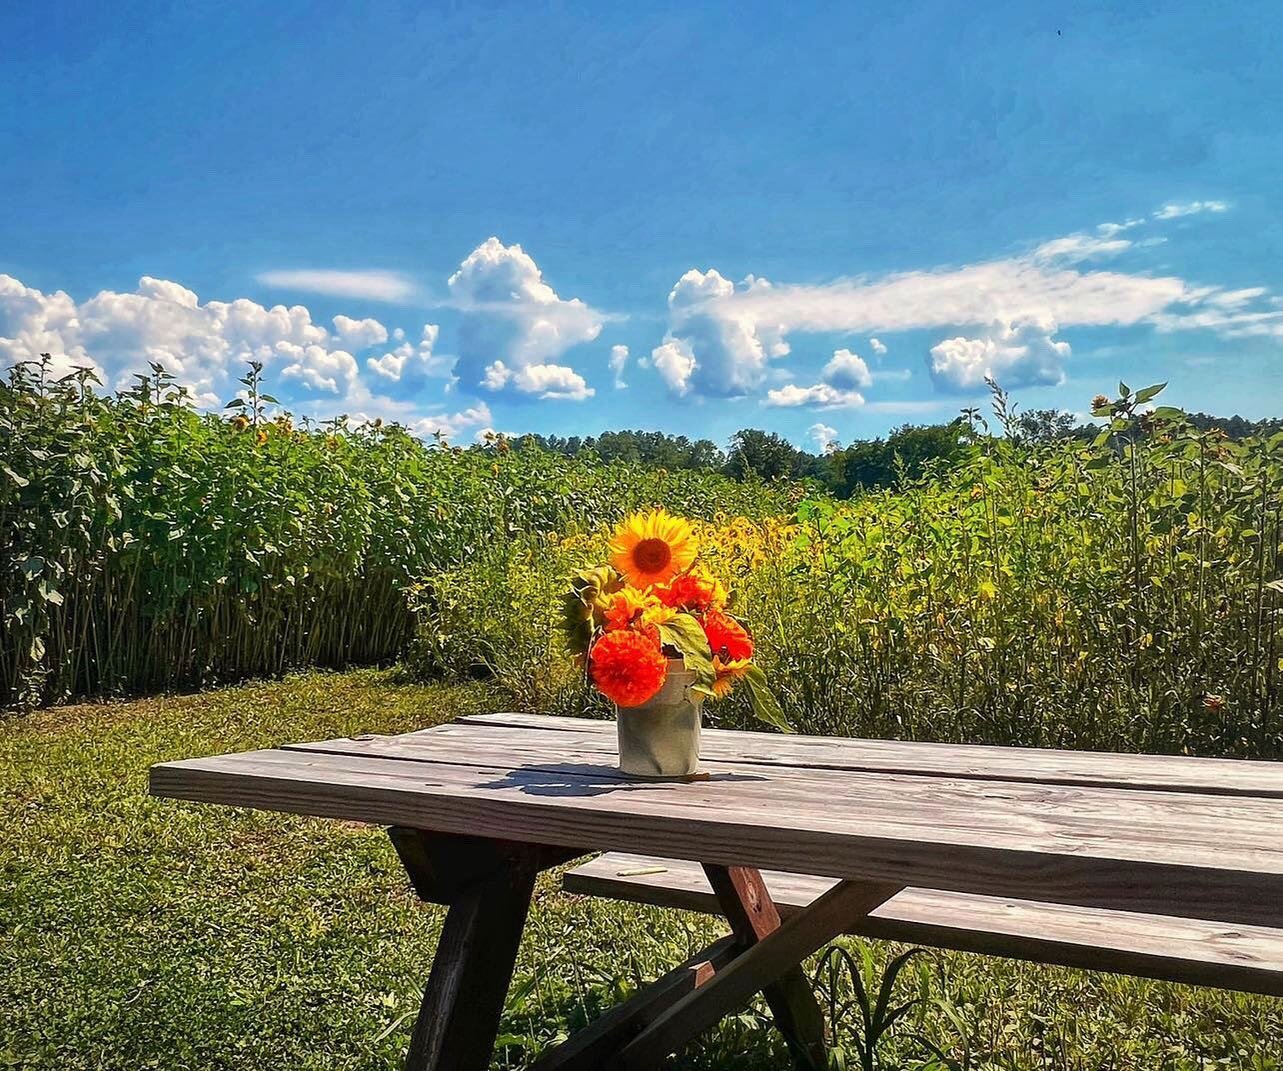 Your friendly reminder that 🌻🌻 is peaking this weekend in Massachusetts. 

And @lonebirchblossoms in Hardwick, MA has beautiful fields for PYO.

🌻
Free parking on Route 32 + huge fields of late summer flowers including zinnias and snap dragons. 

